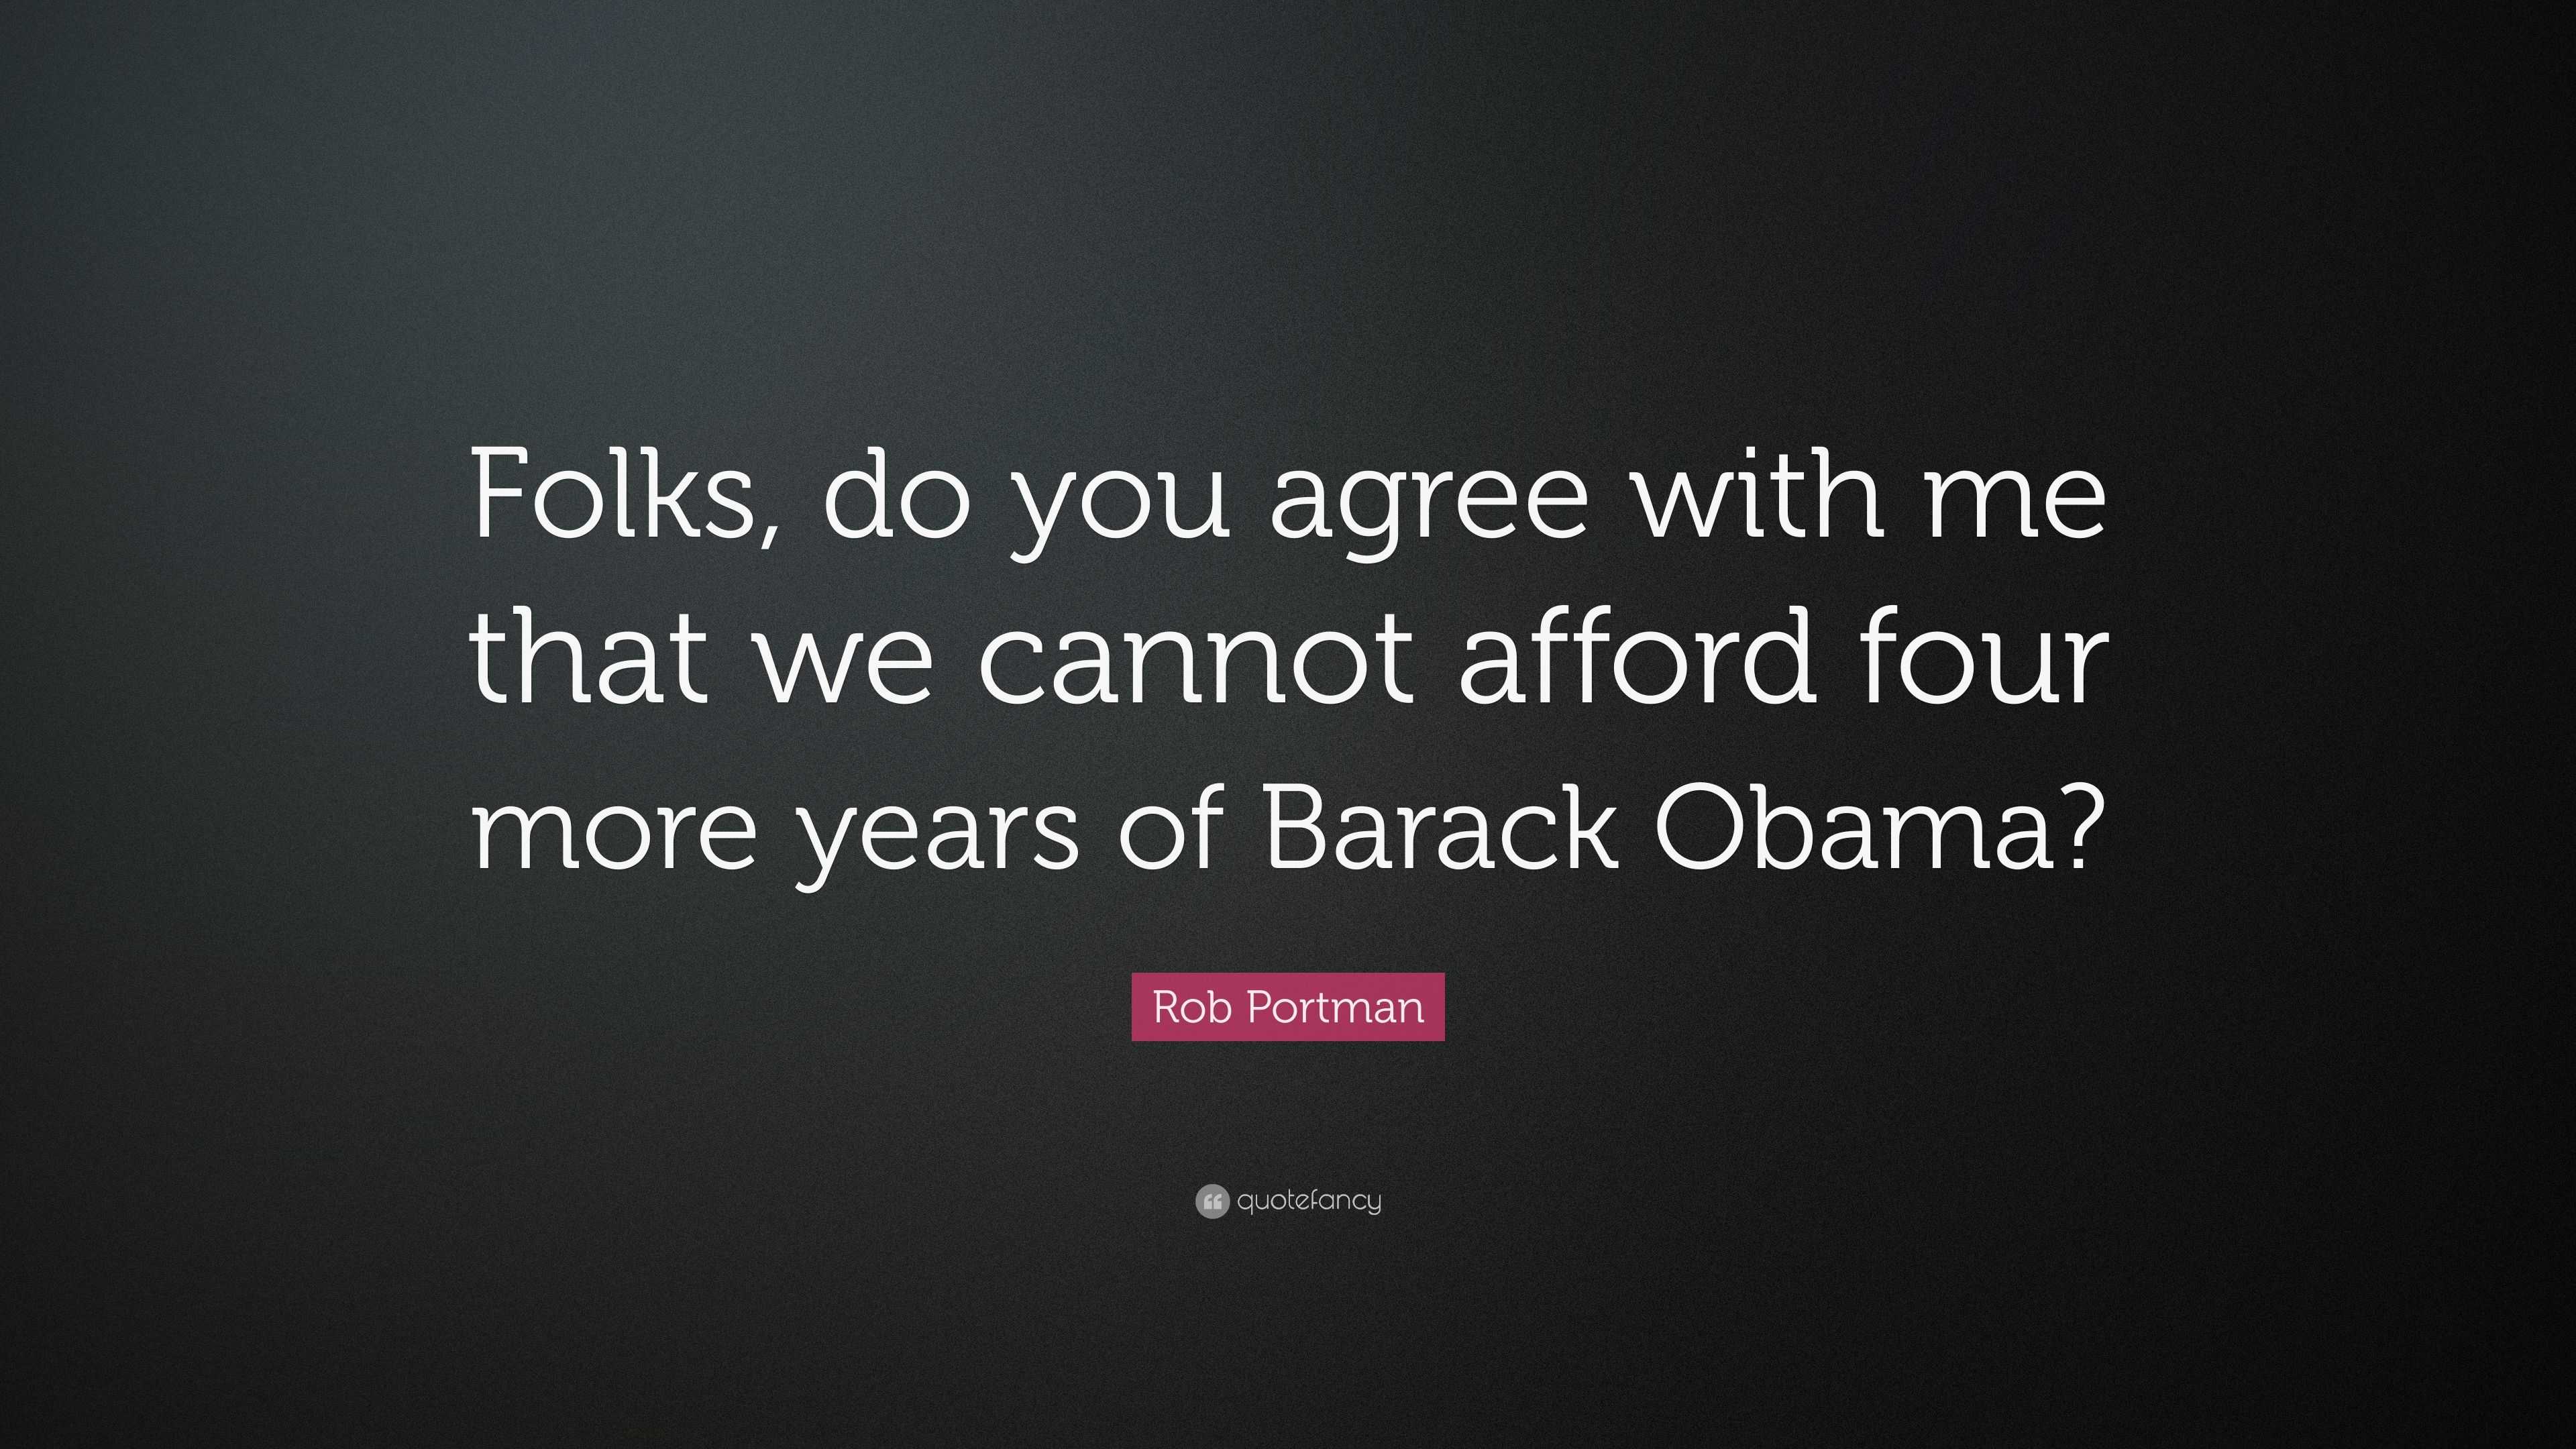 Rob Portman Quote Folks Do You Agree With Me That We Cannot Afford Four More Years Of Barack Obama 7 Wallpapers Quotefancy